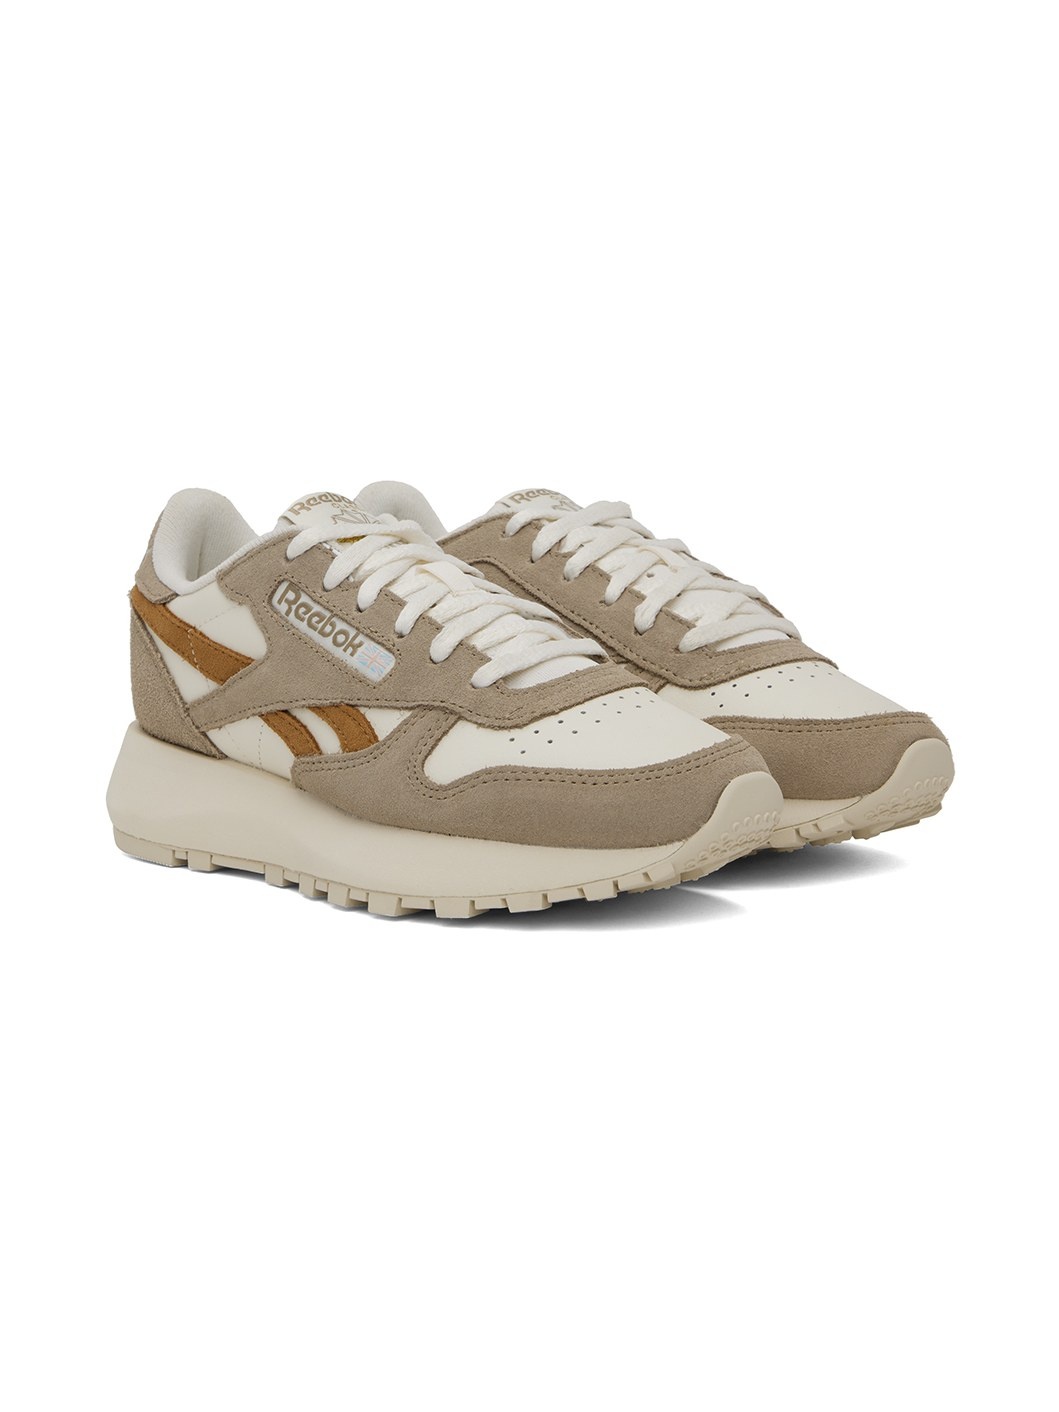 White & Beige Classic Sneakers - 4